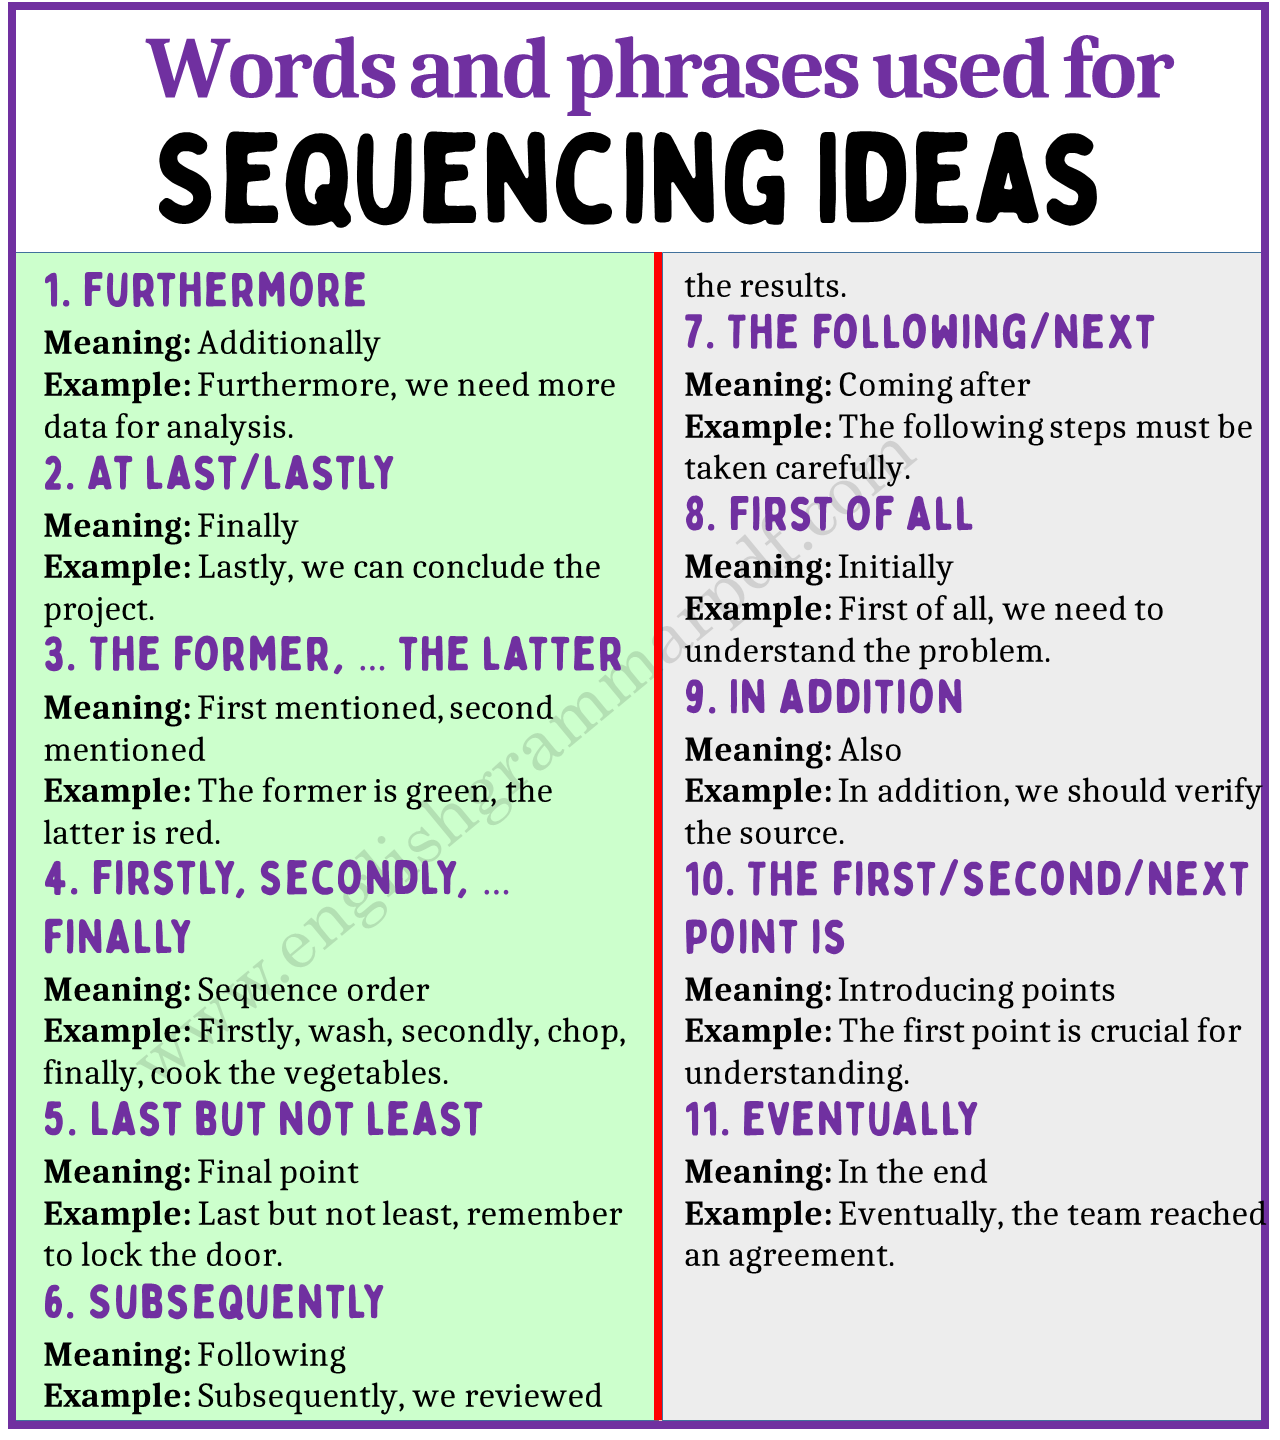 Words and Phrases to Use for Sequencing Ideas